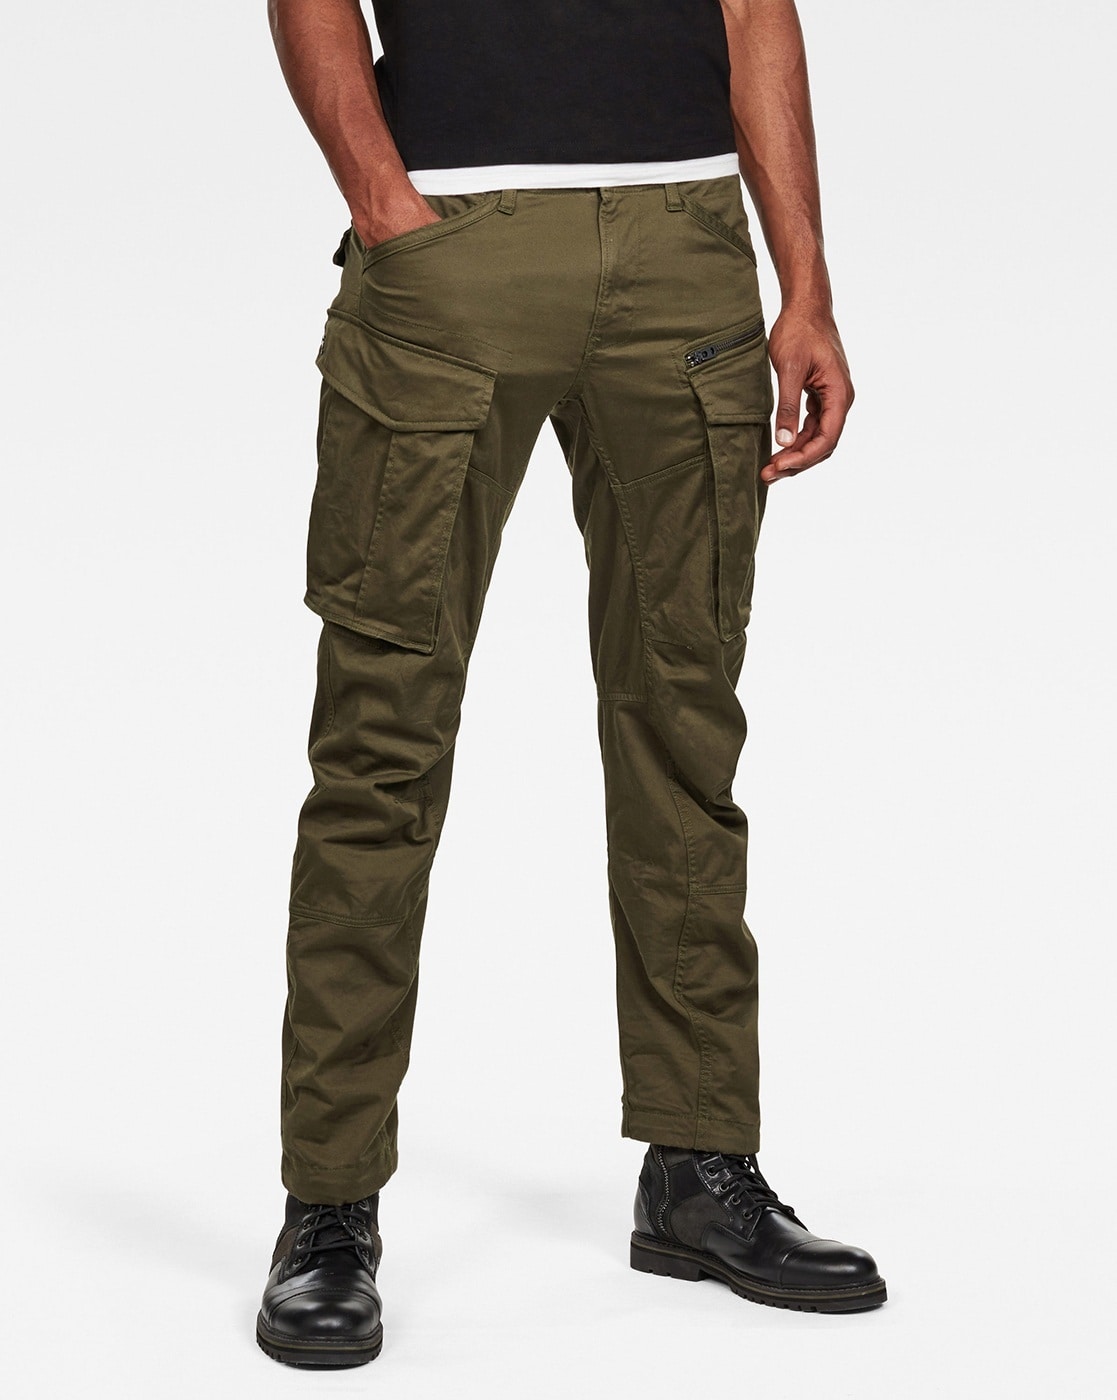 Top more than 176 g star raw cargo pants super hot